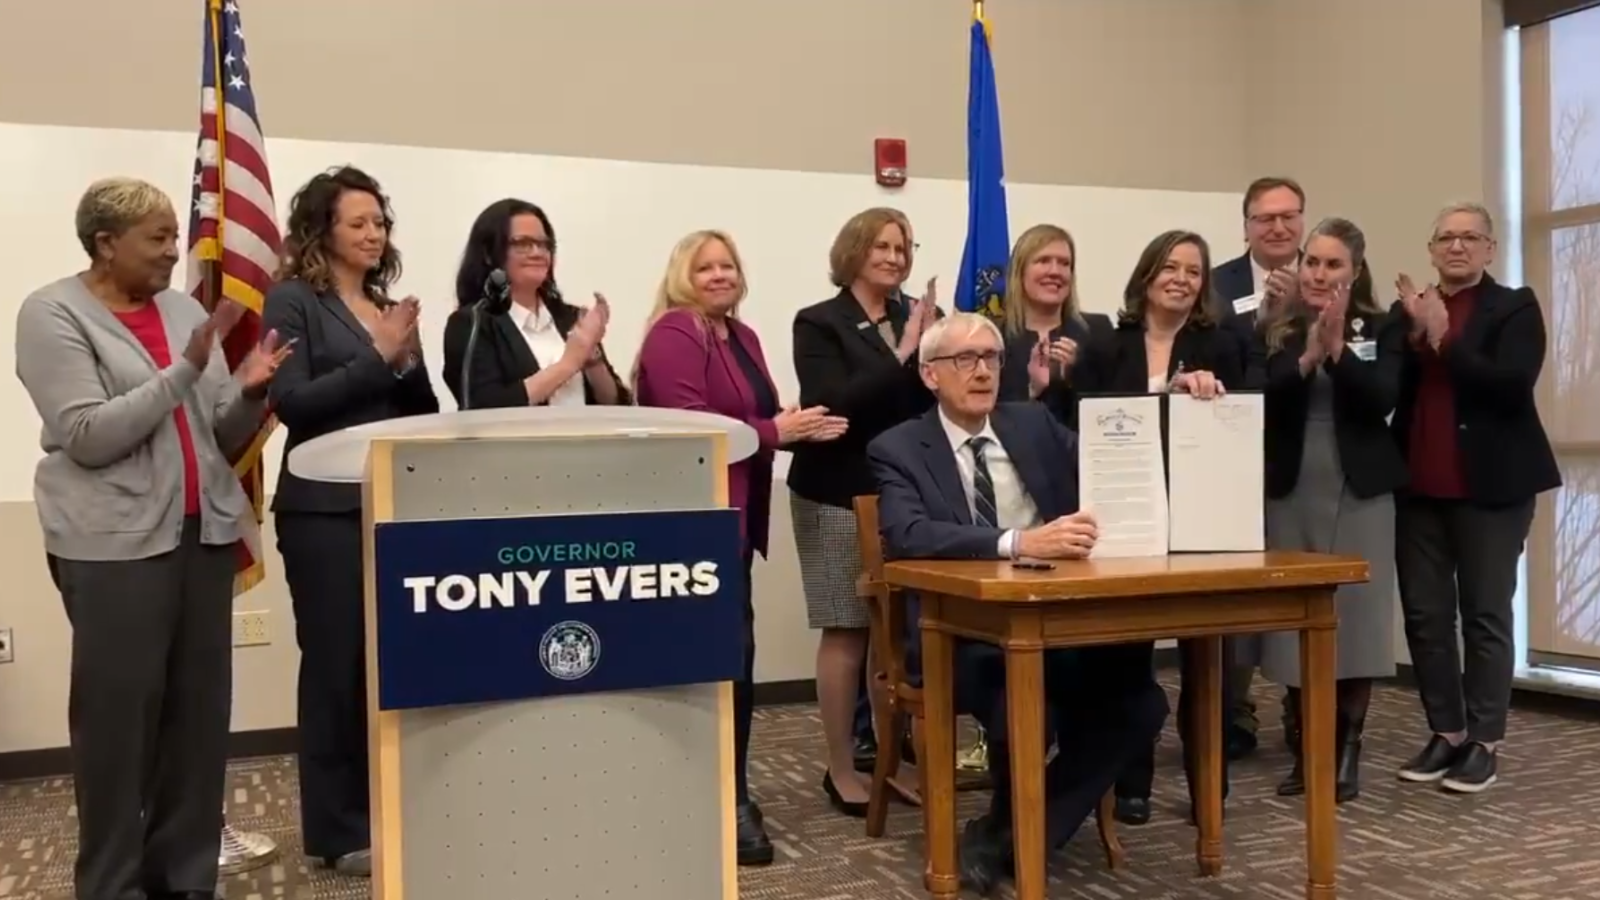 Evers signs executive order creating healthcare workforce task force